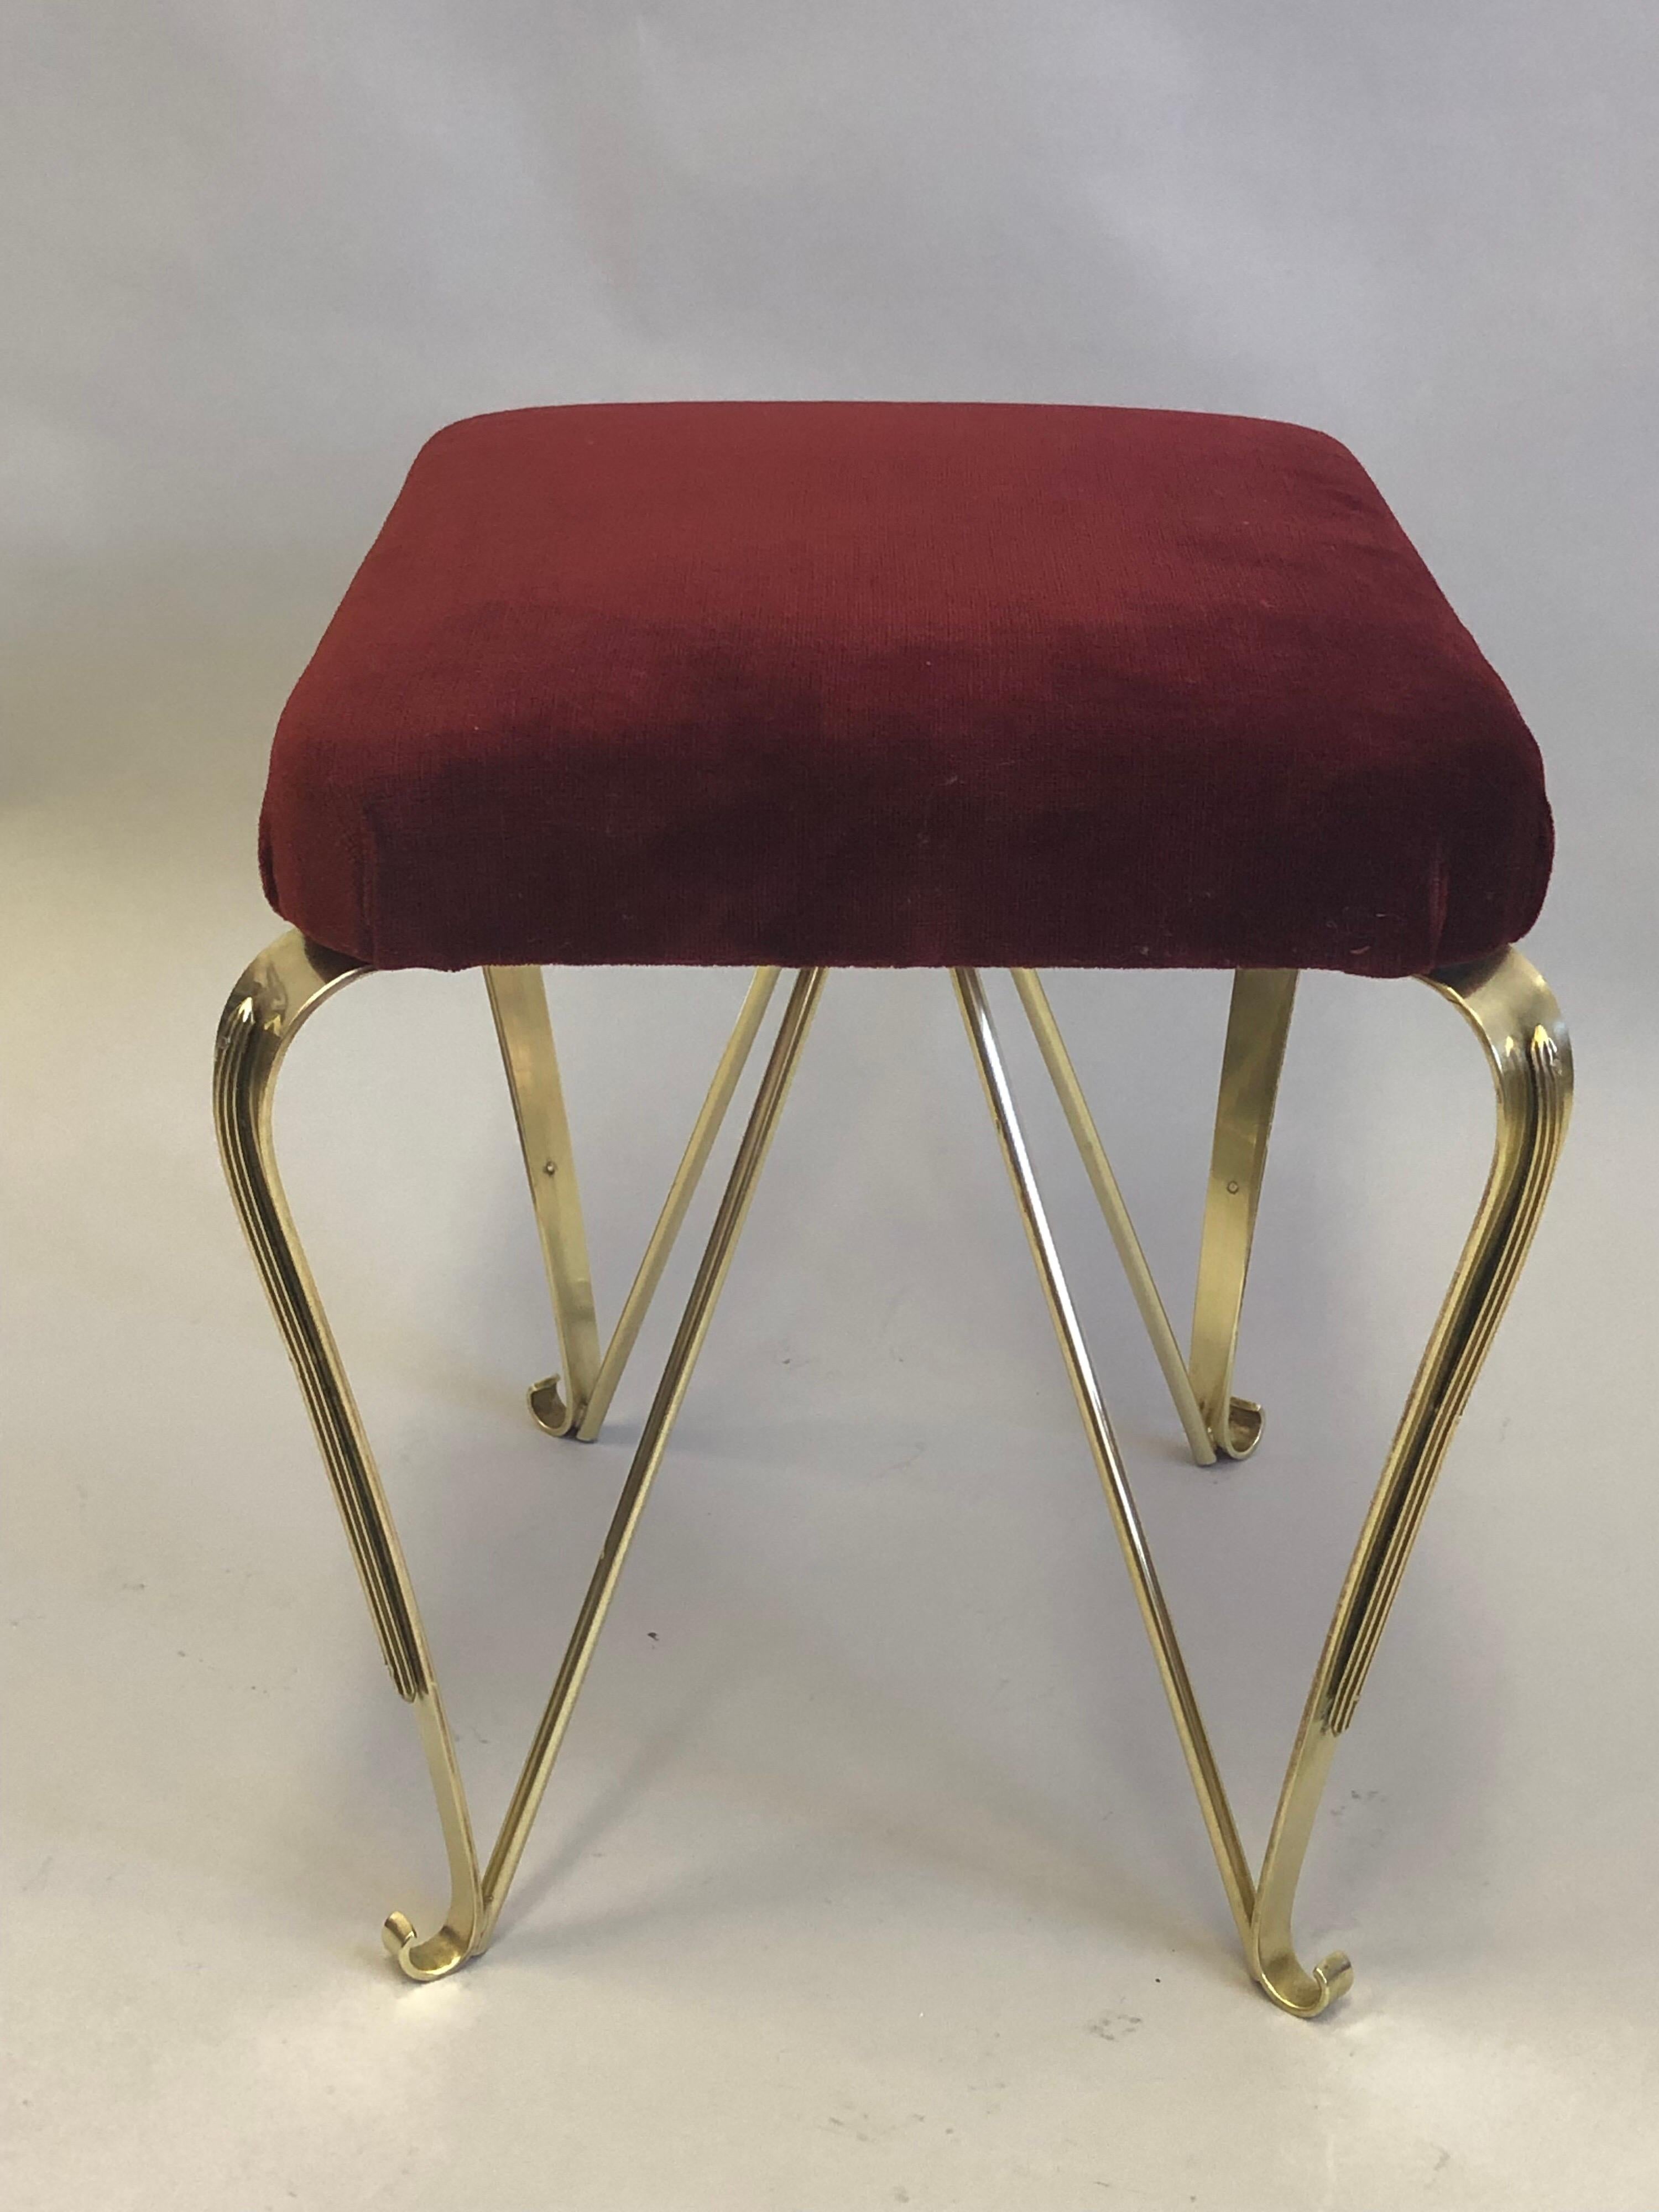 Pair of Italian Mid-Century Modern Neoclassical Solid Brass Benches by Jansen For Sale 6